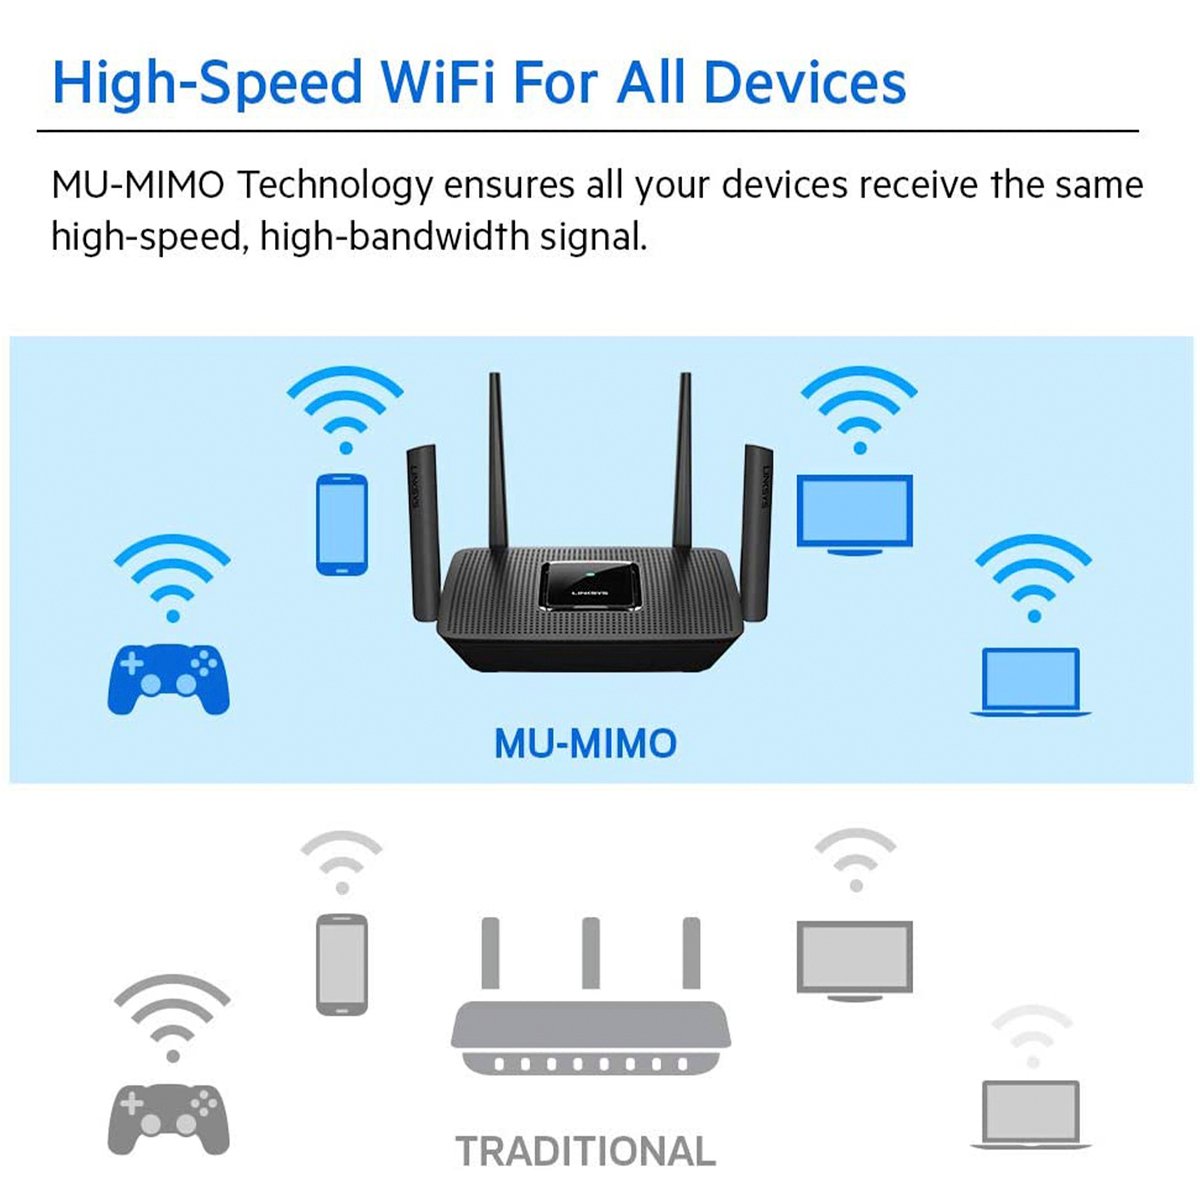 Linksys MR9000-ME Tri-Band Mesh WiFi 5 Router (AC3000, Compatible with Velop Whole Home WiFi System, 4 Gigabit Ethernet Ports, Parental Controls Via Linksys App), Black